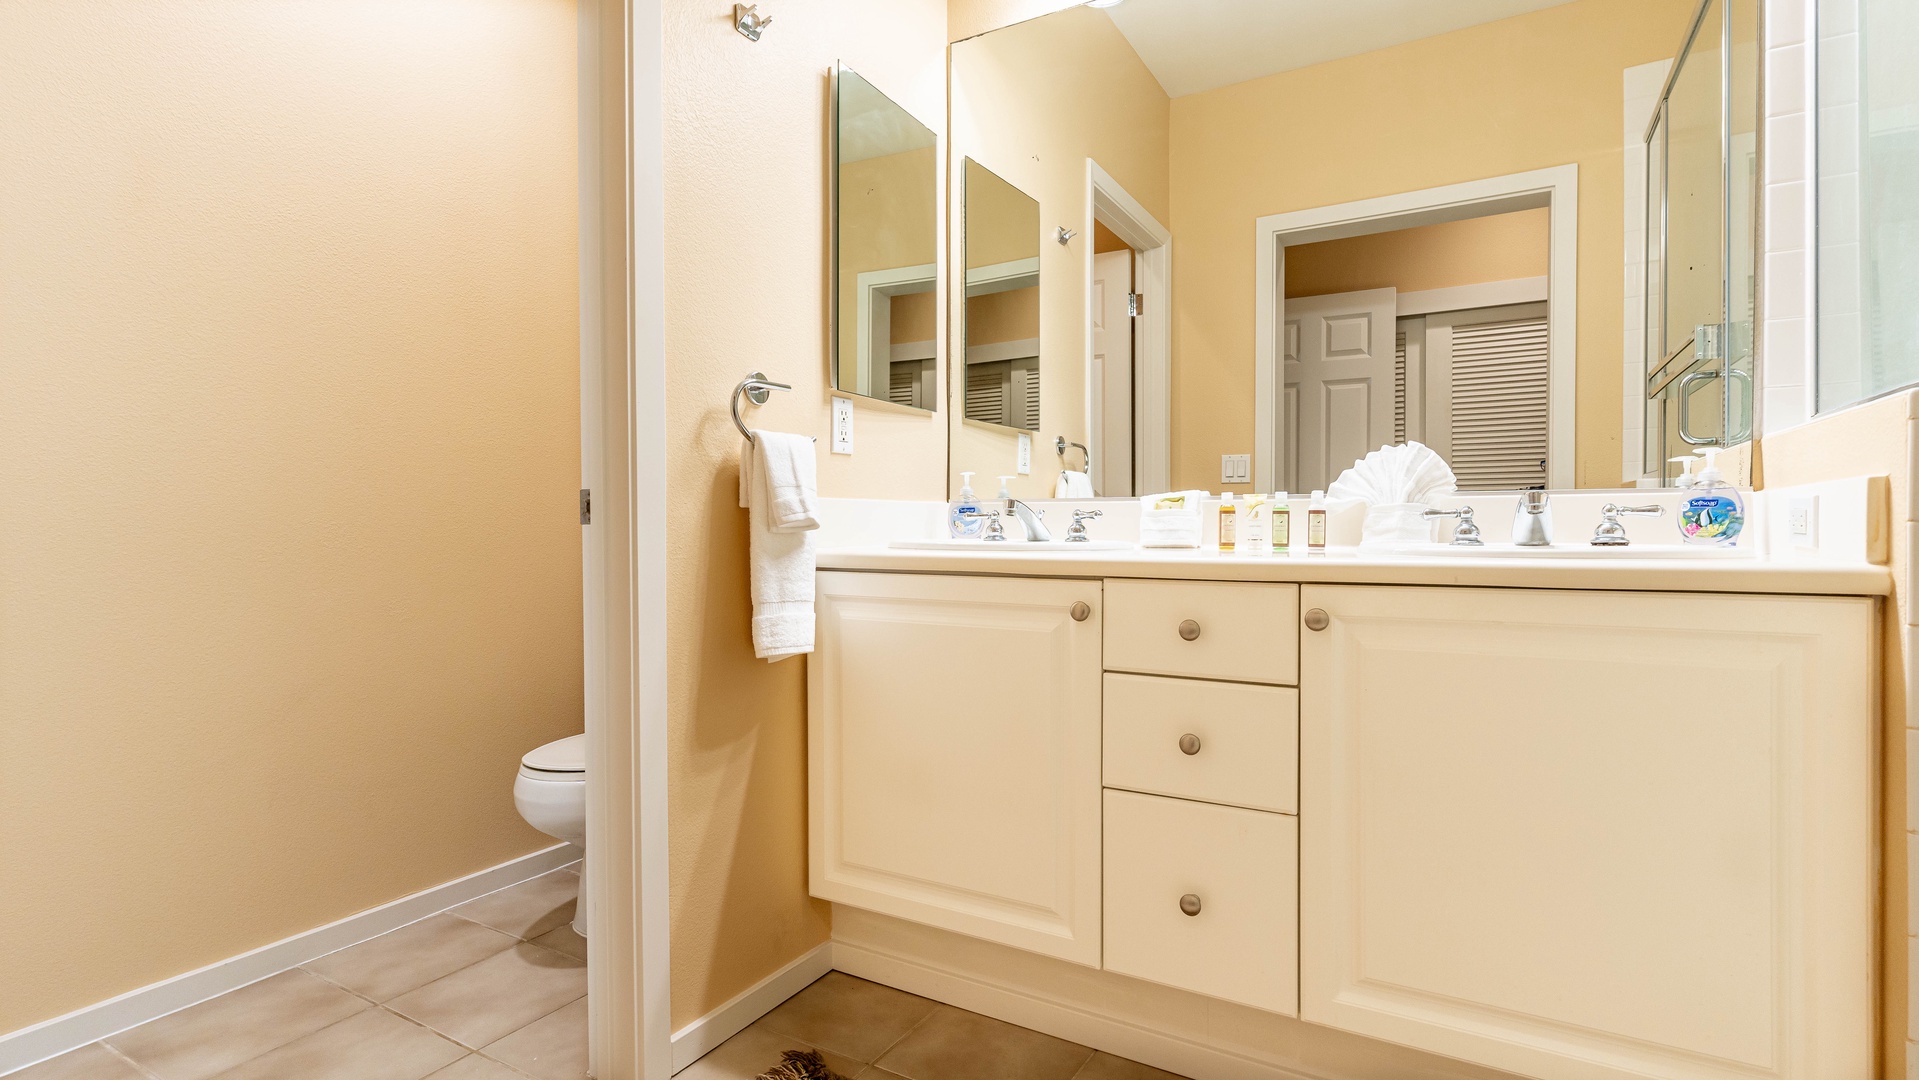 Kapolei Vacation Rentals, Coconut Plantation 1192-4 - The double vanity in the primary guest bedroom.